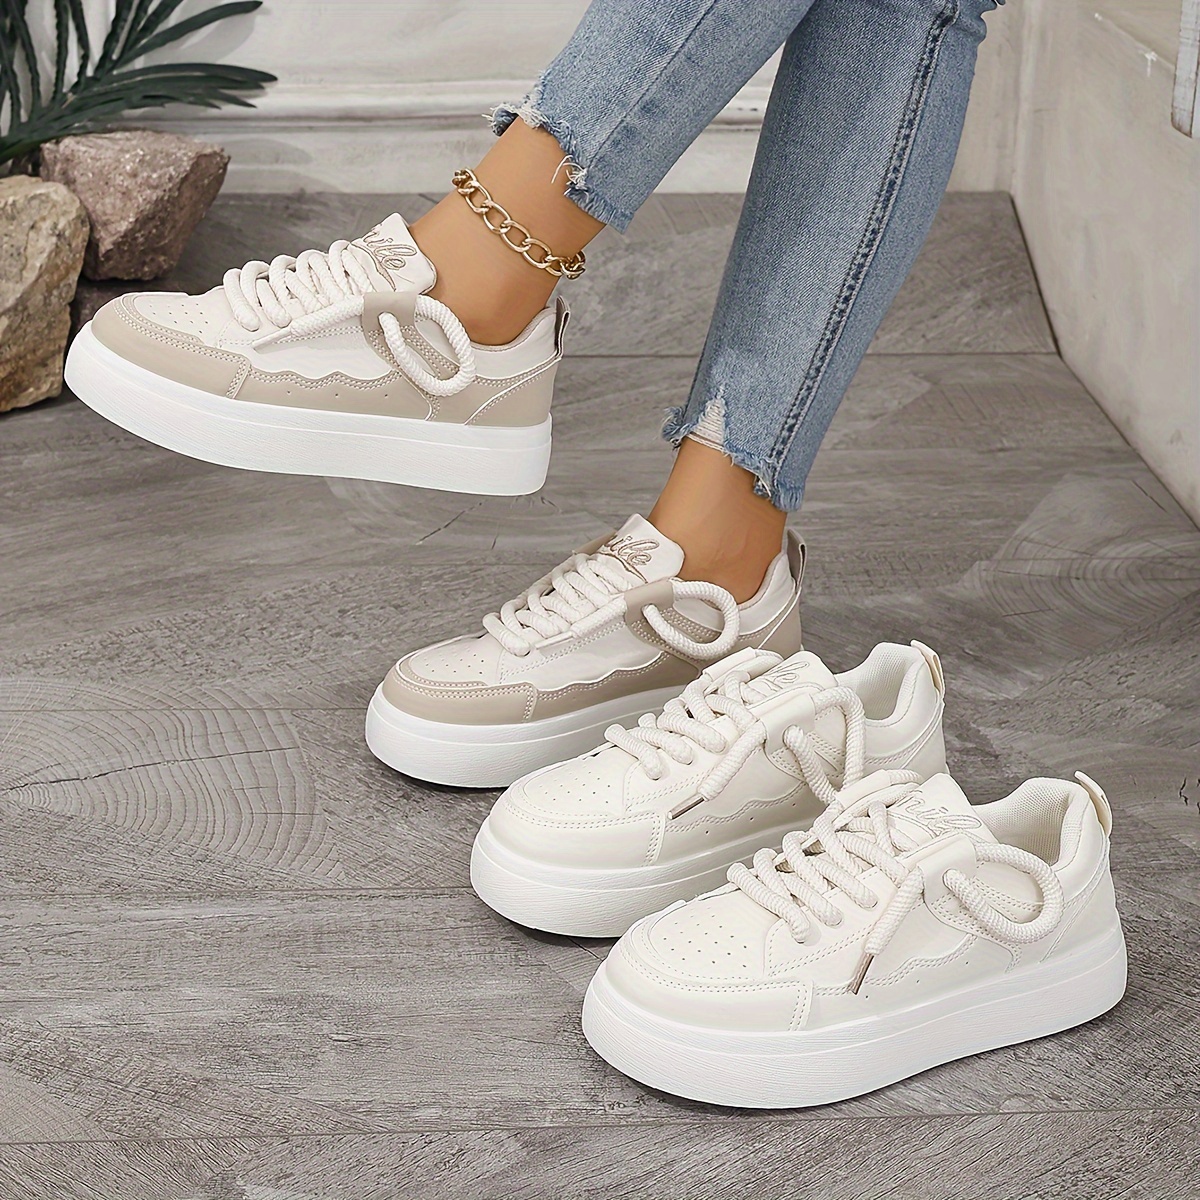 

Women's Solid Color Casual Sneakers, Lace Up Platform Soft Sole Walking Skate Shoes, Breathable Low-top Comfort Shoes